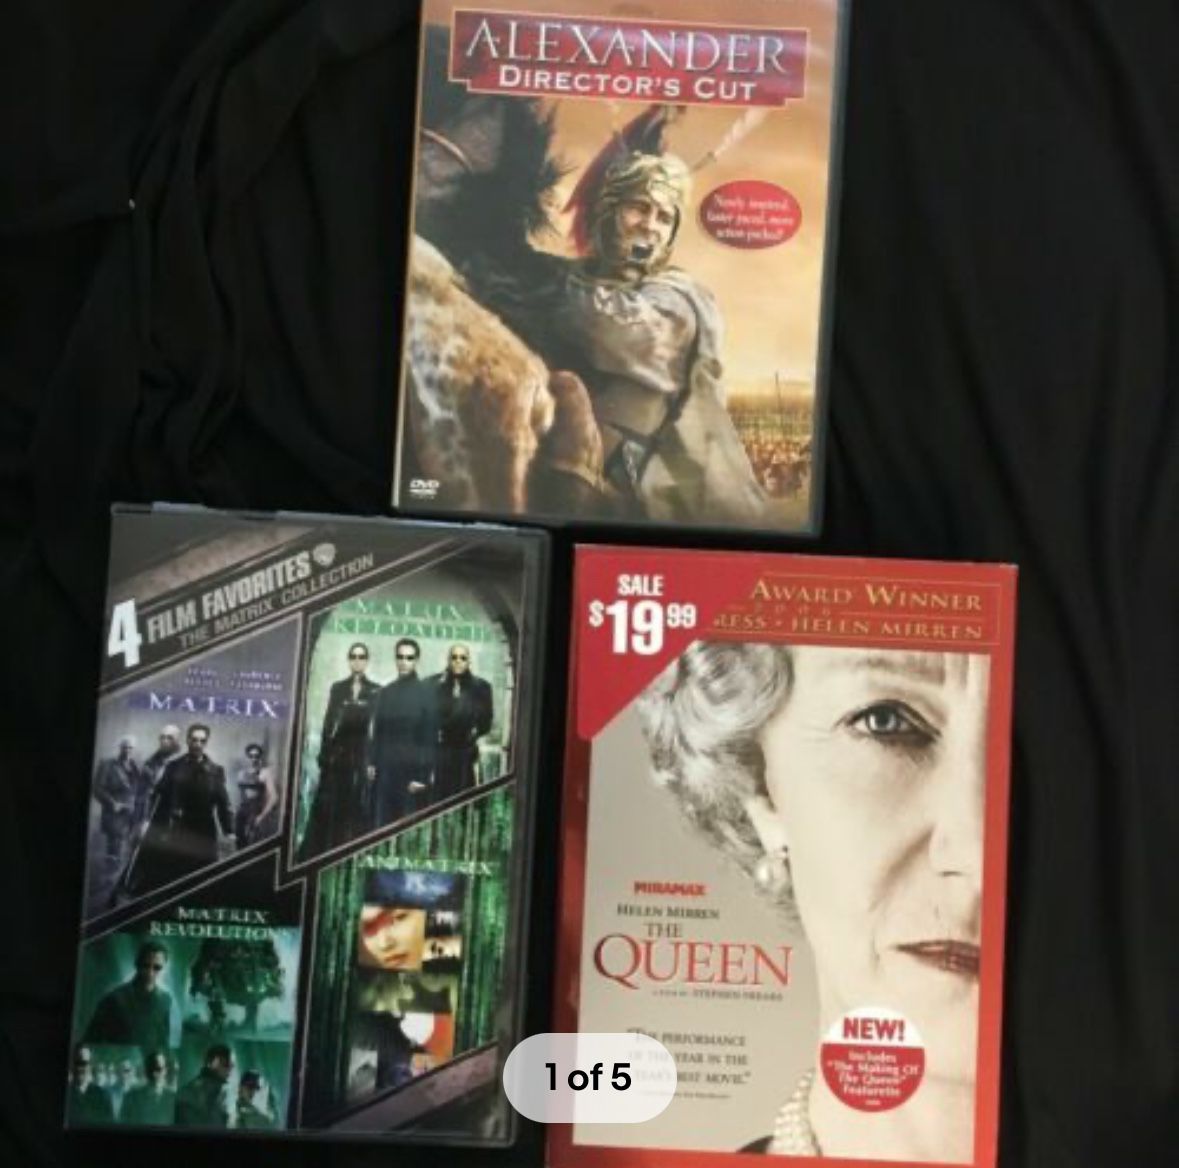 6 MOVIES on 3 DVDS. Alexander, The Matrix Collection and The Queen. New & used